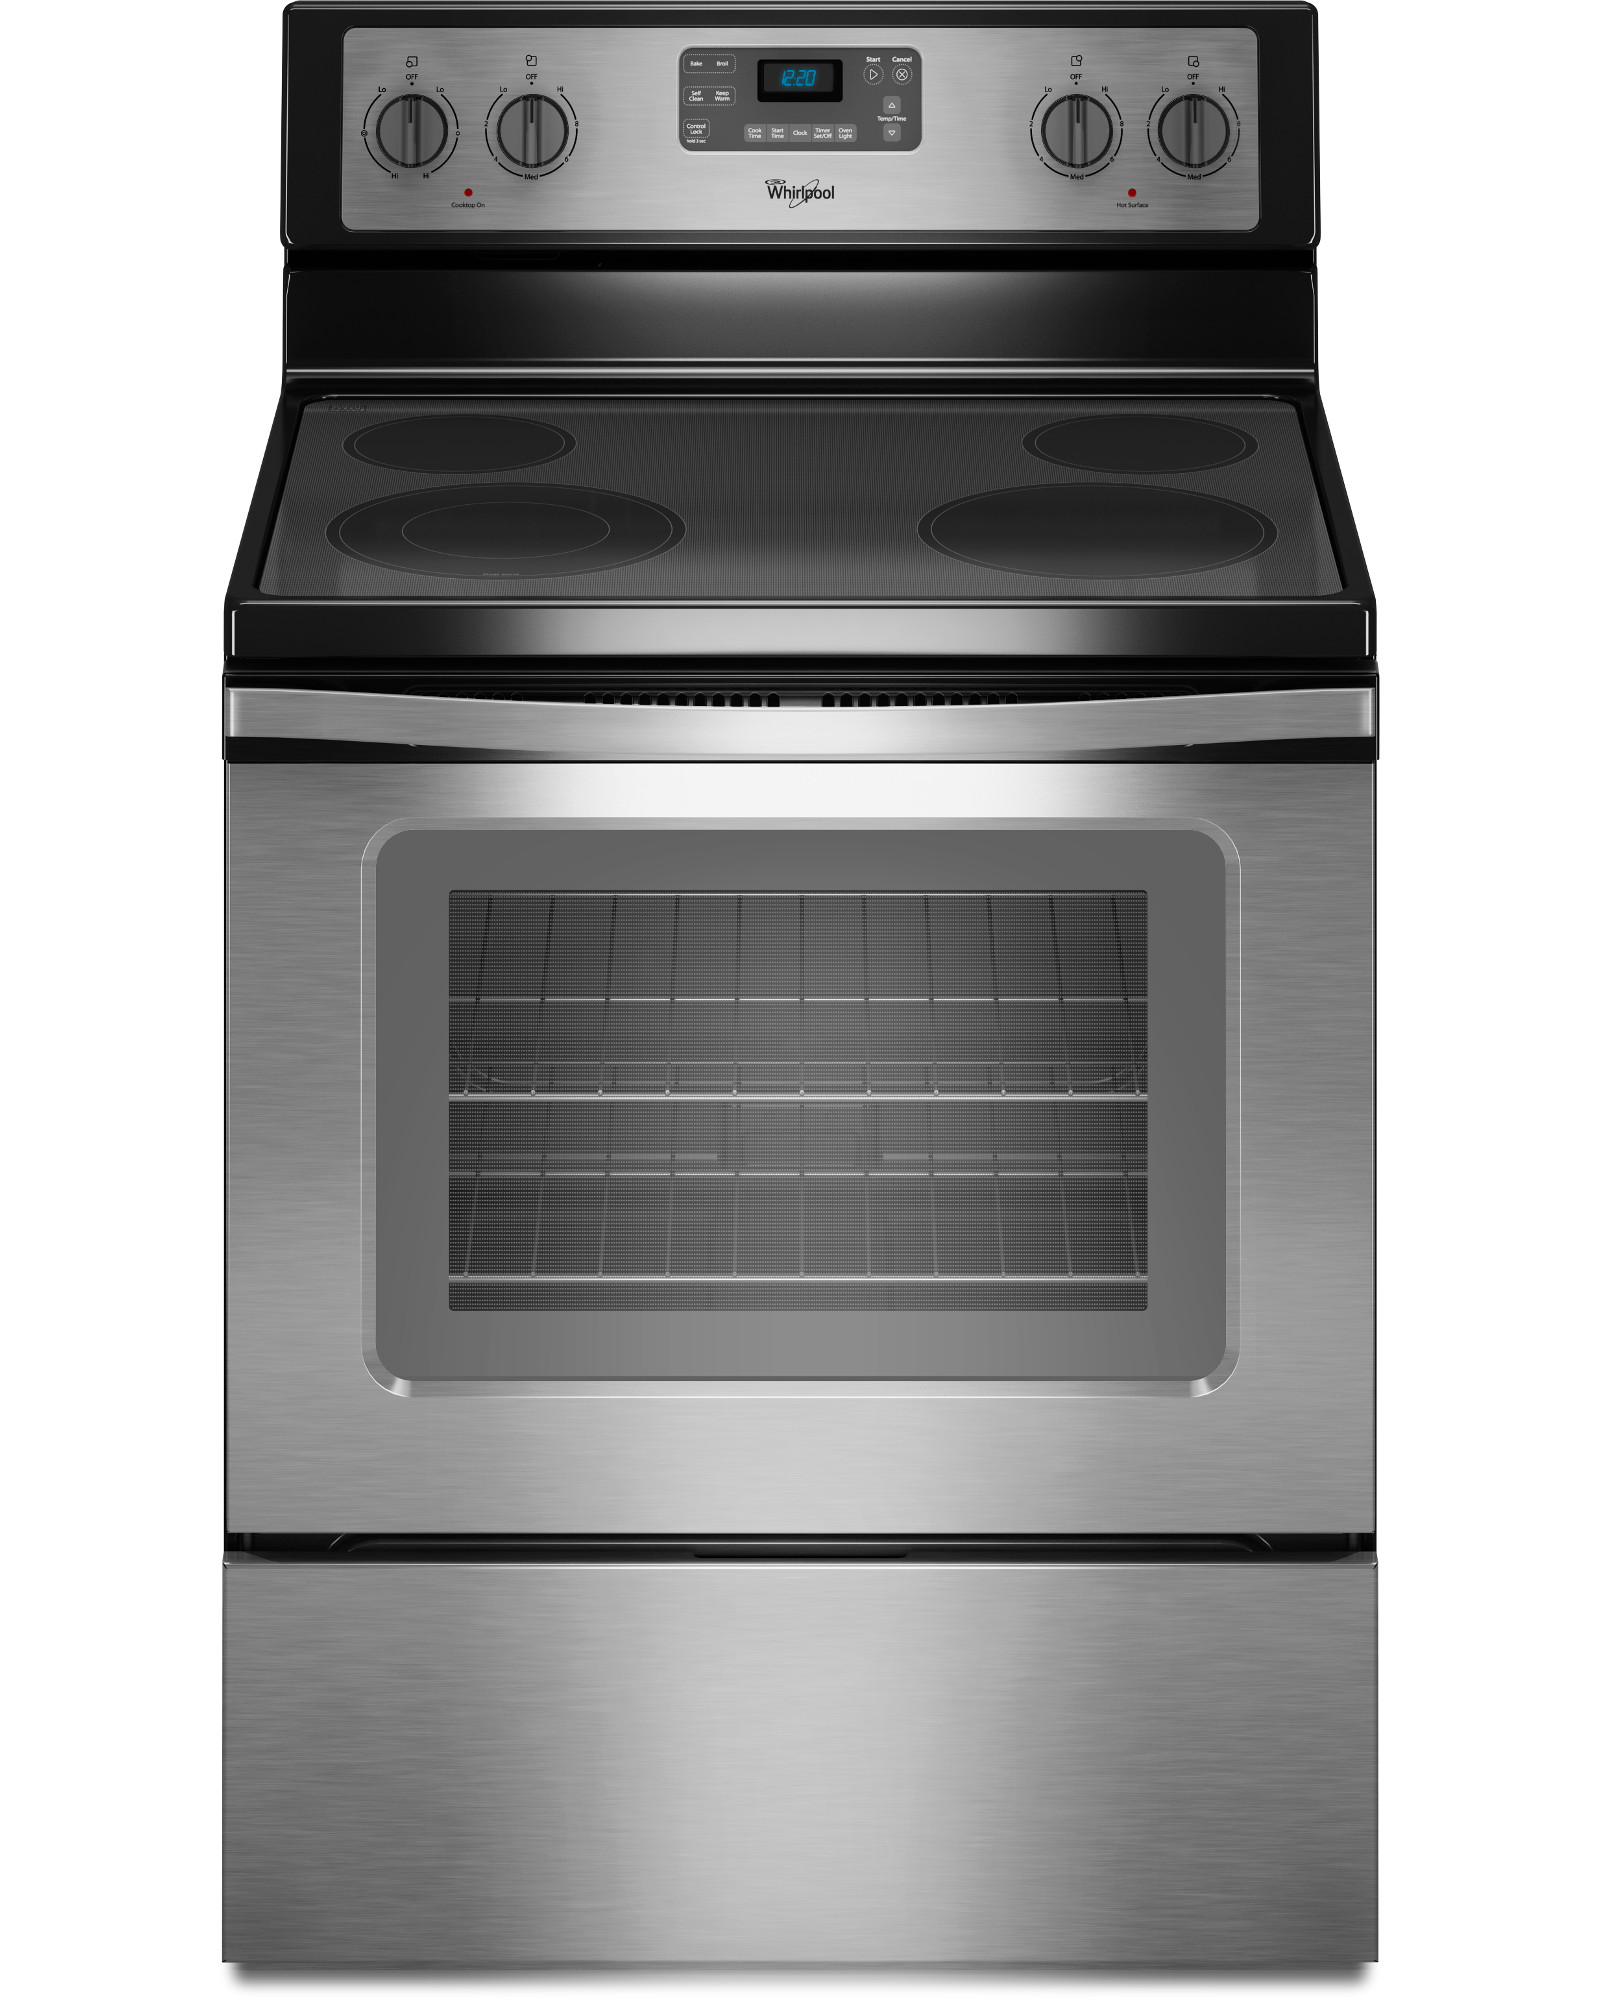 Today only: Whirlpool 5.3 cu ft freestanding electric range for $350